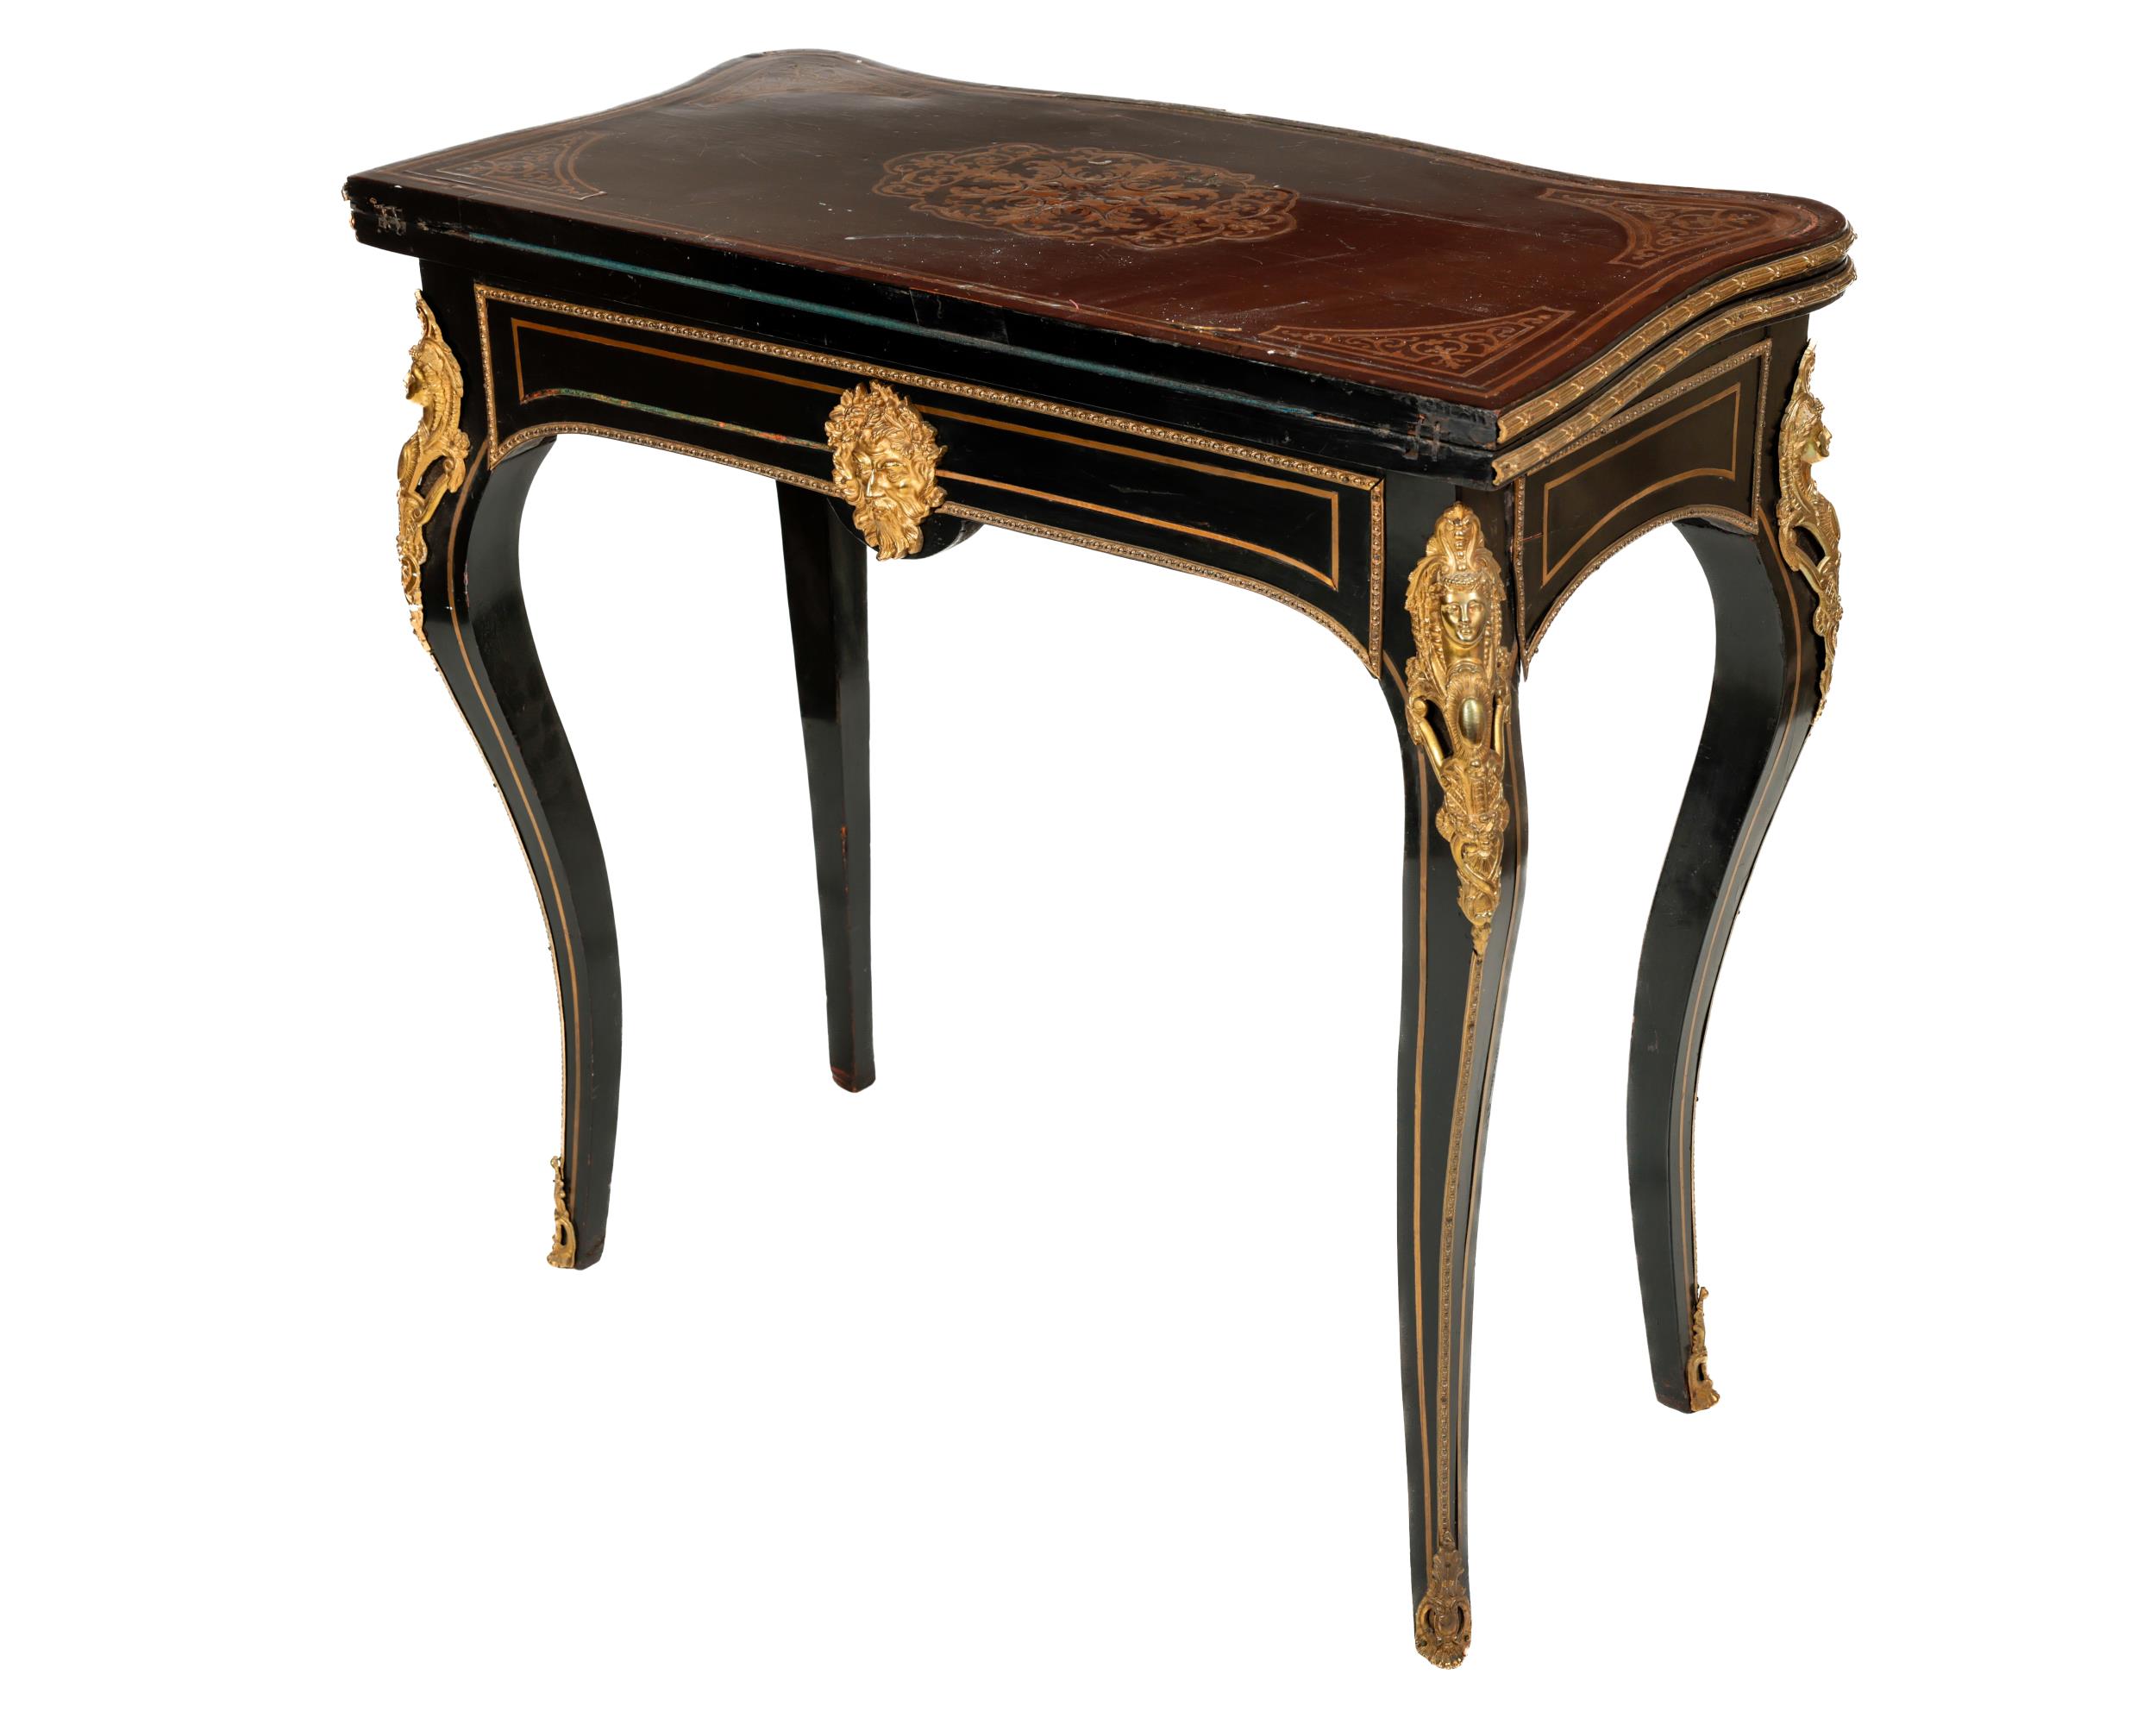 A 19th Century French ebonised and brass inlaid fold-over Games Table, the top opening to reveal a